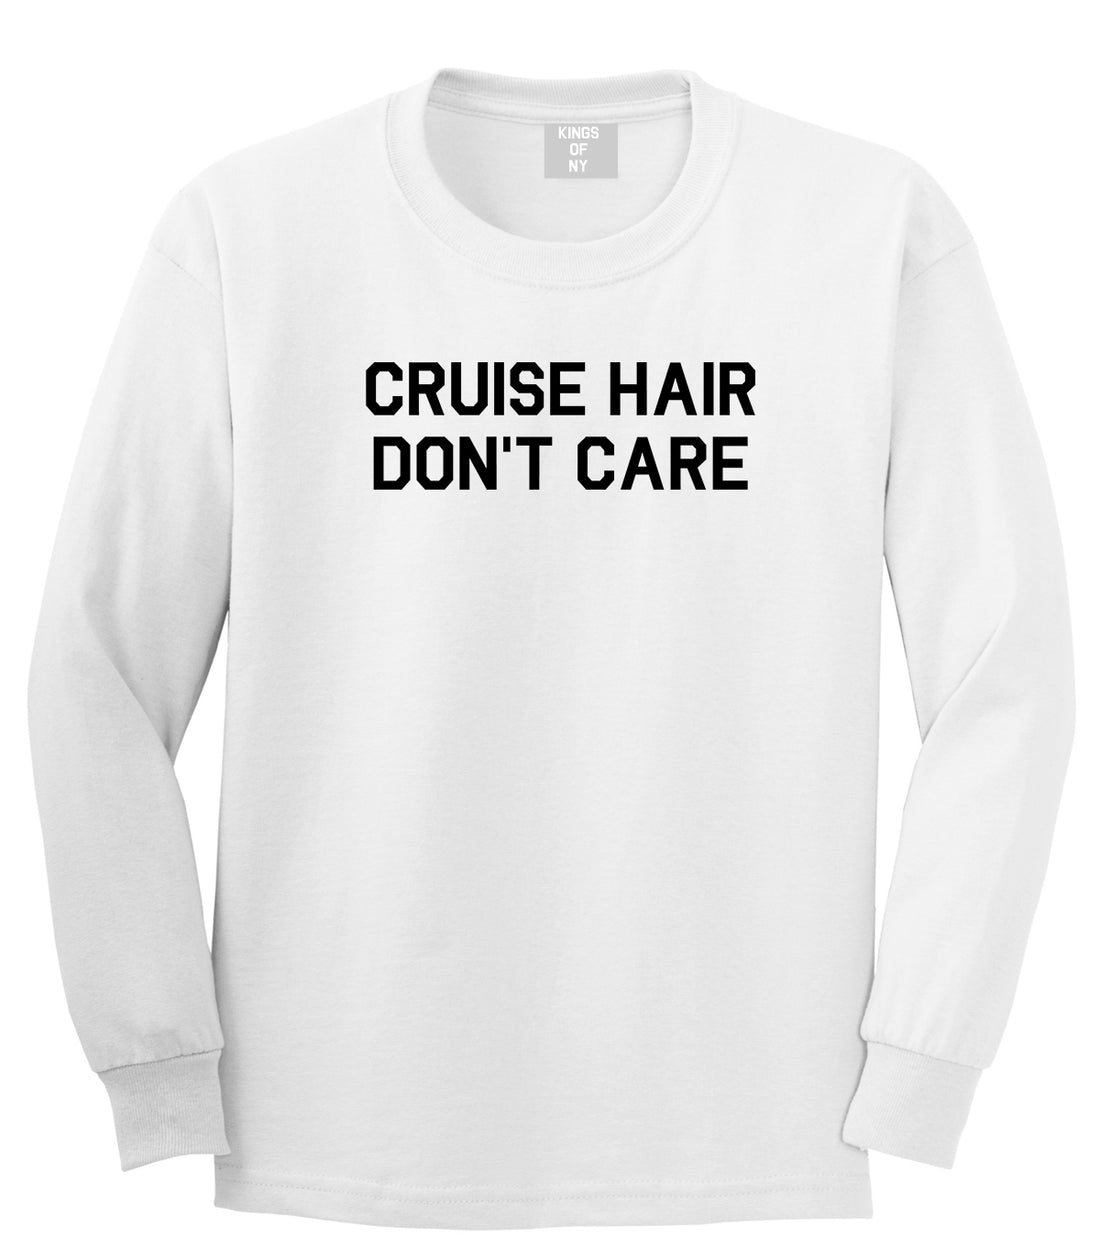 Cruise Hair Dont Care Mens White Long Sleeve T-Shirt by Kings Of NY